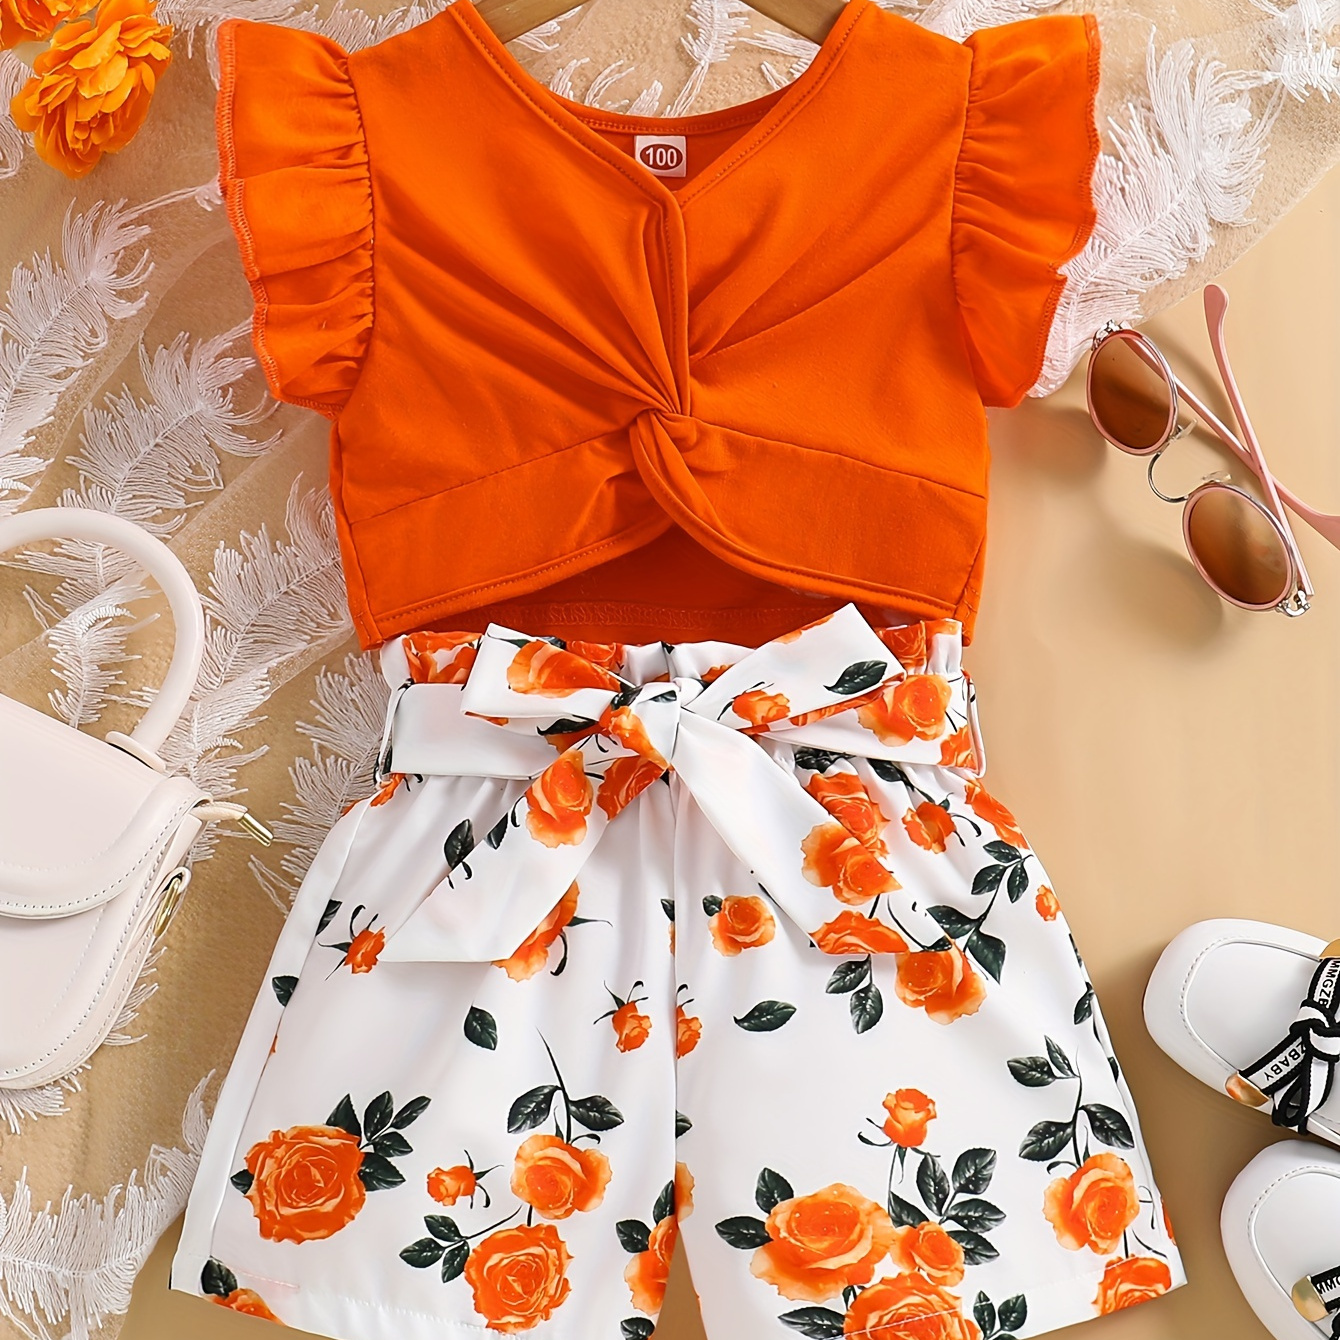 

Orange Flowers Print Girls 2pcs Lettuce Sleeve Wrapped Top + High Waist Shorts Set, Casual 2-piece Summer Outfit For Girls